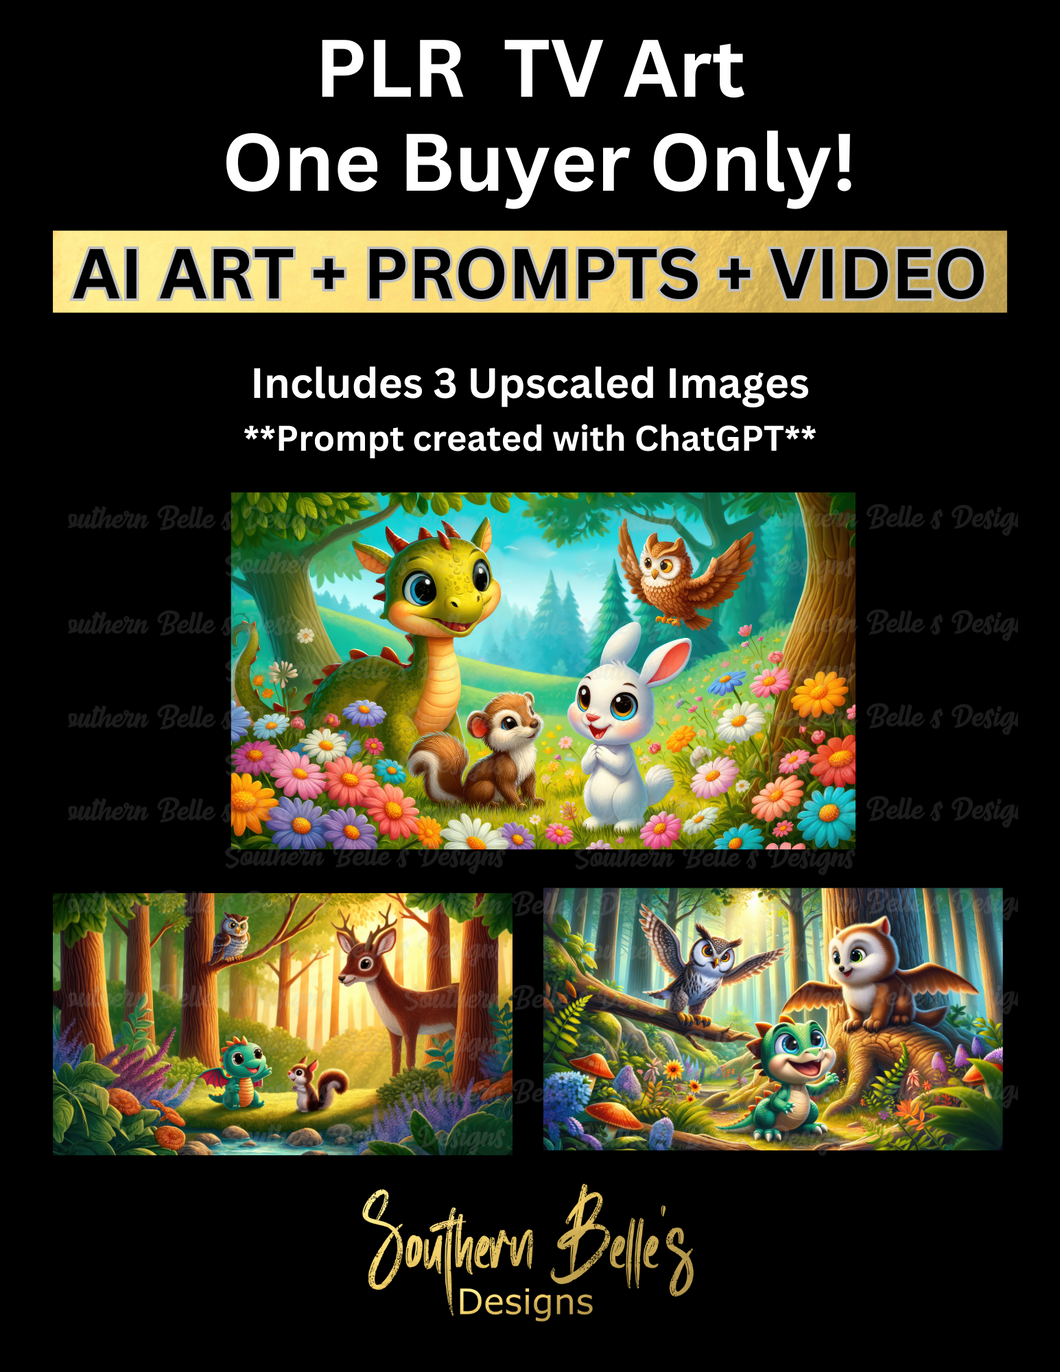 PLR TV Art - Whimsical Forest Friends - Video Included (One Buyer Only!)